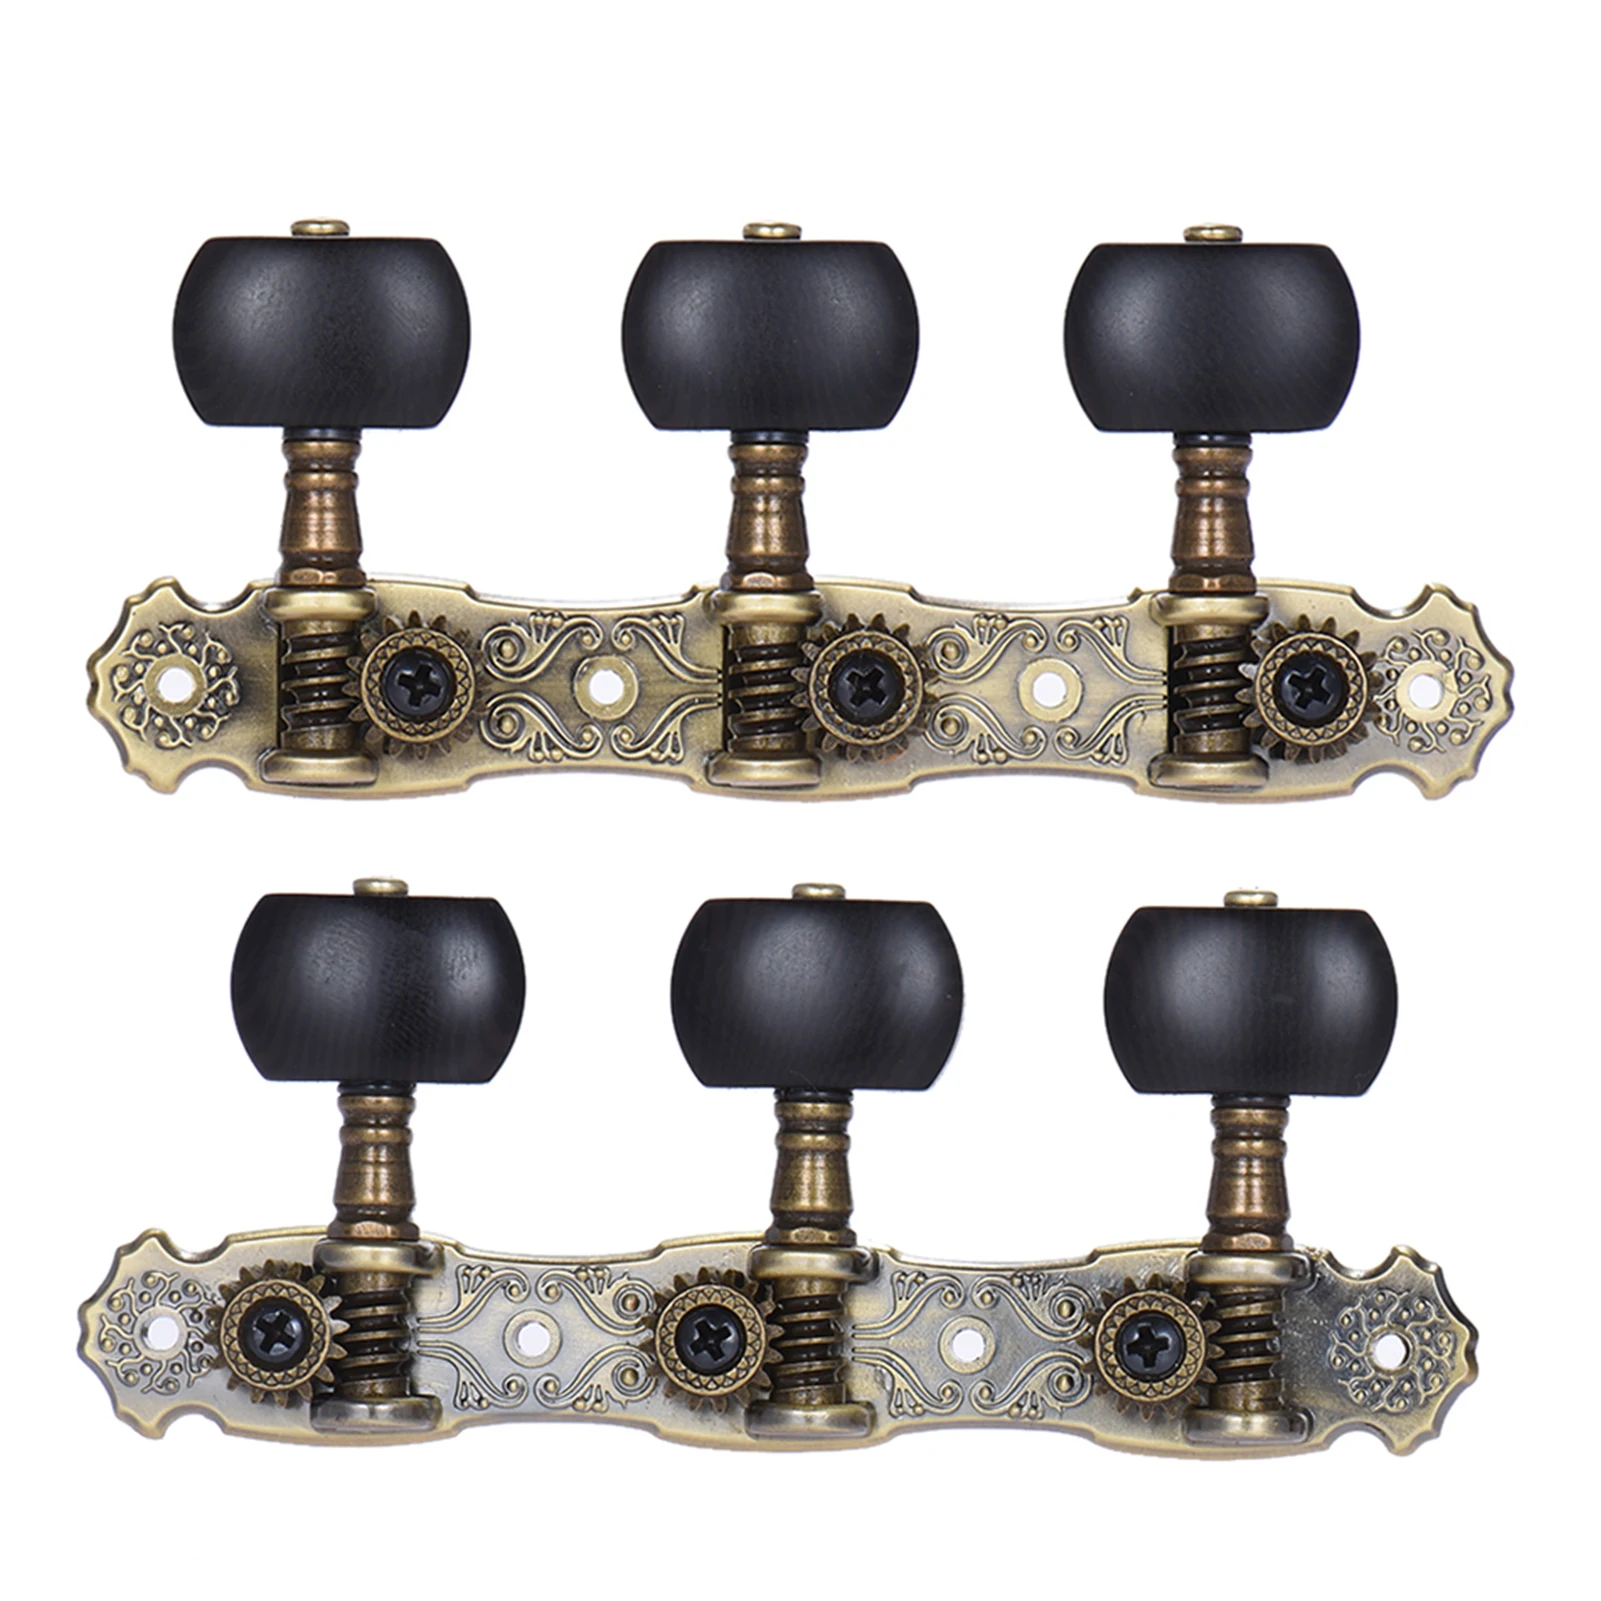 

Alice 2 Pcs (L&R) Classical Guitar Tuning Peg Bronze Plated Acoustic Guitar Machine Heads 1 : 16 Tuning Keys Knobs String Tuners